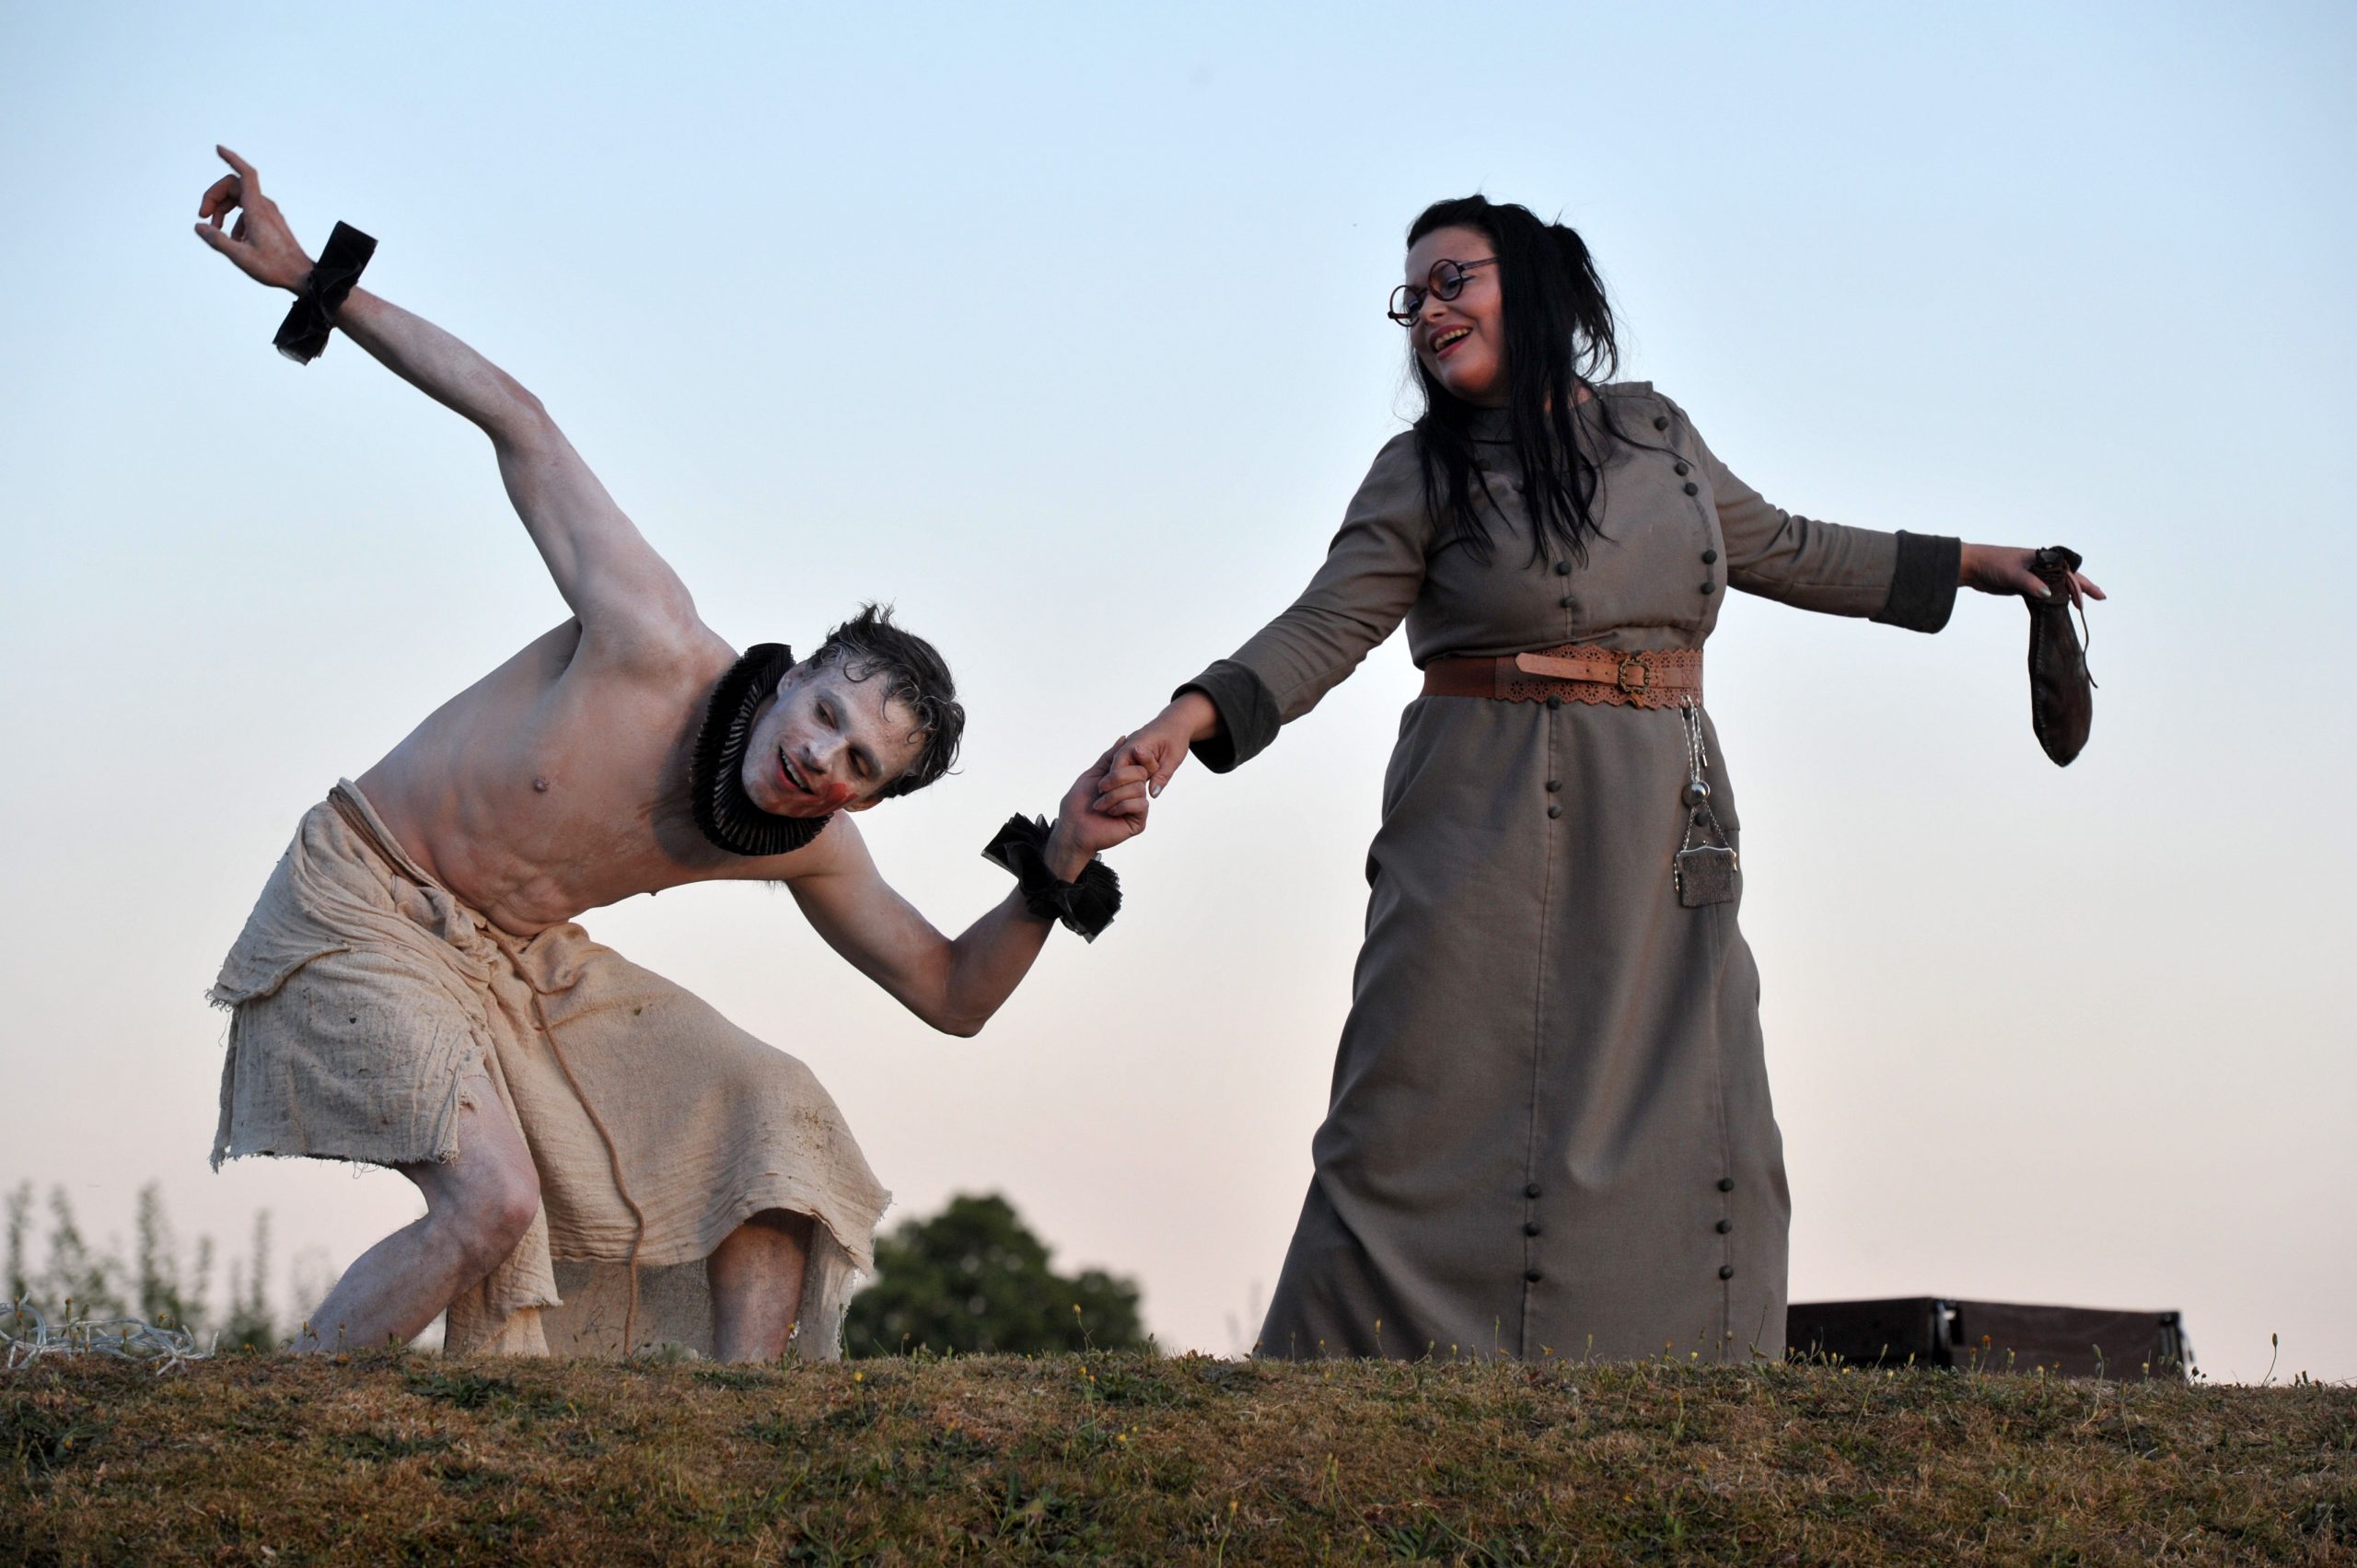 Dan Krikler and Rosalind Blessed as Caliban and Stephano